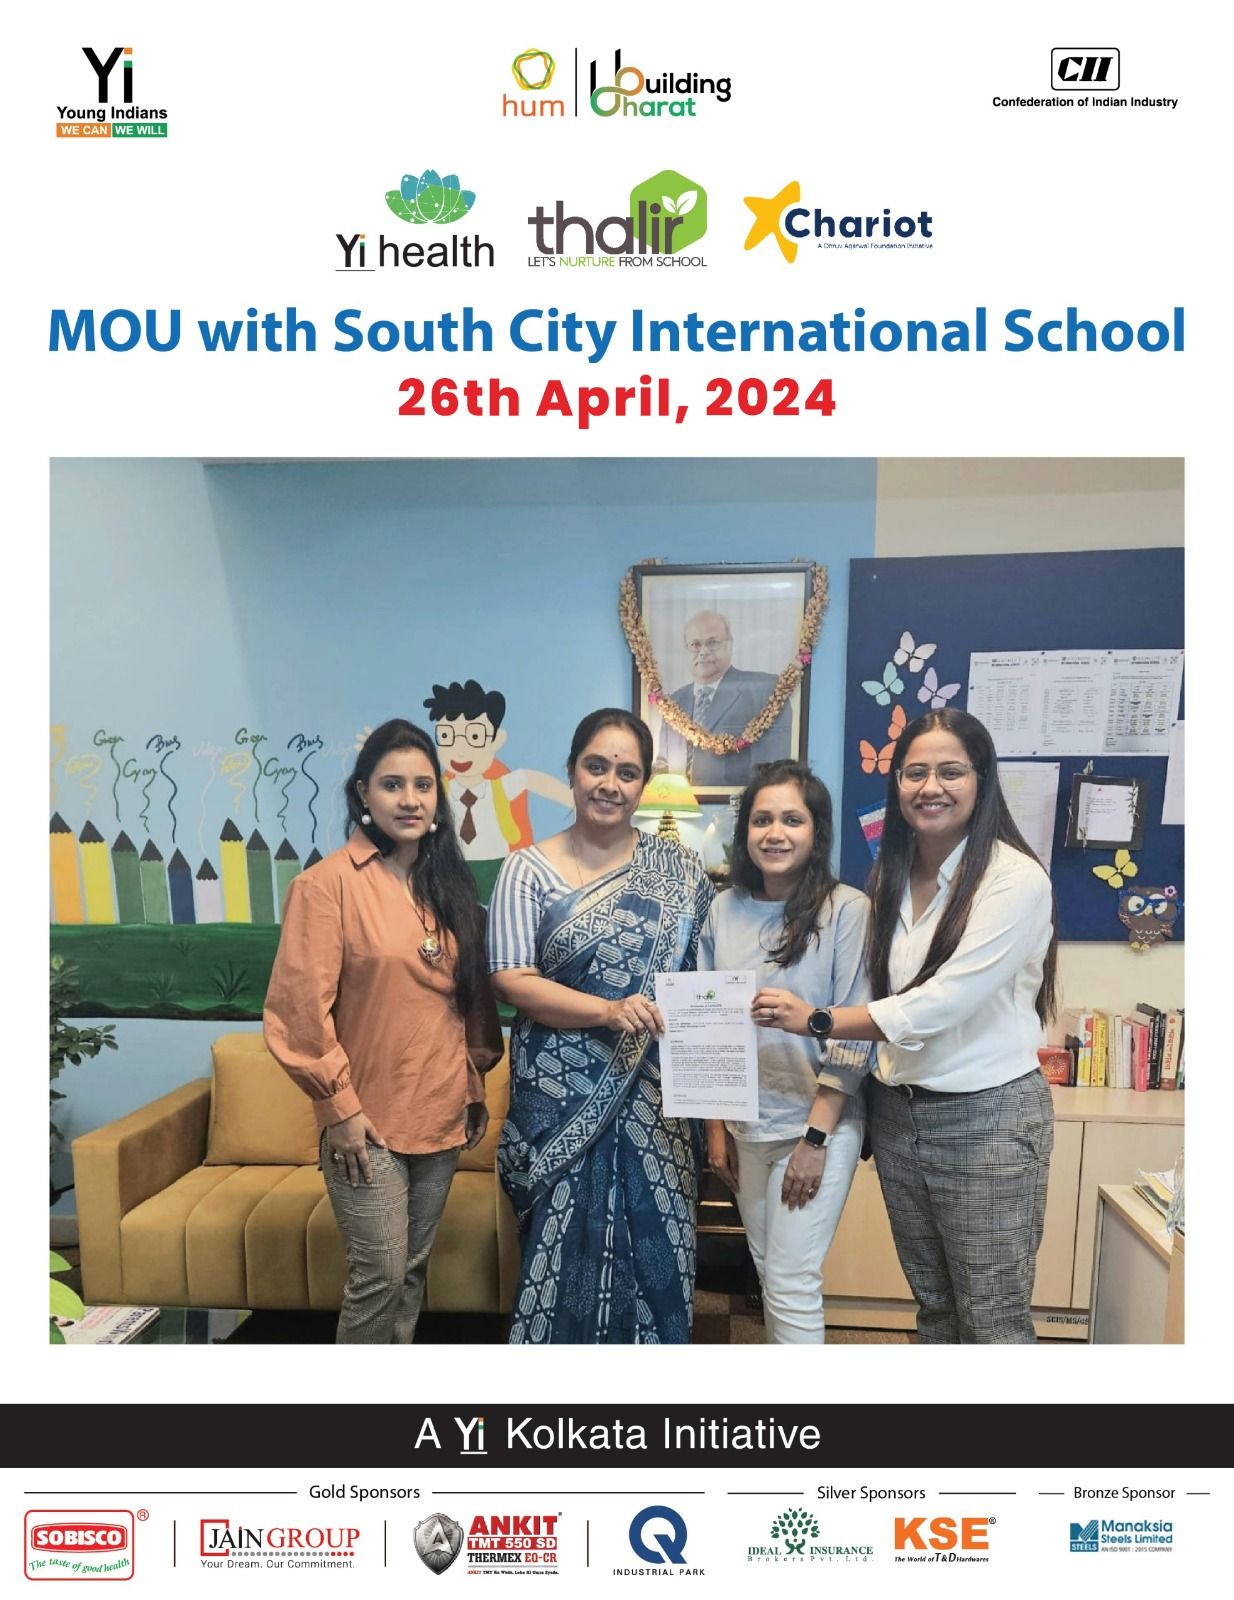 Yi24 | MOU sign with South City International School 